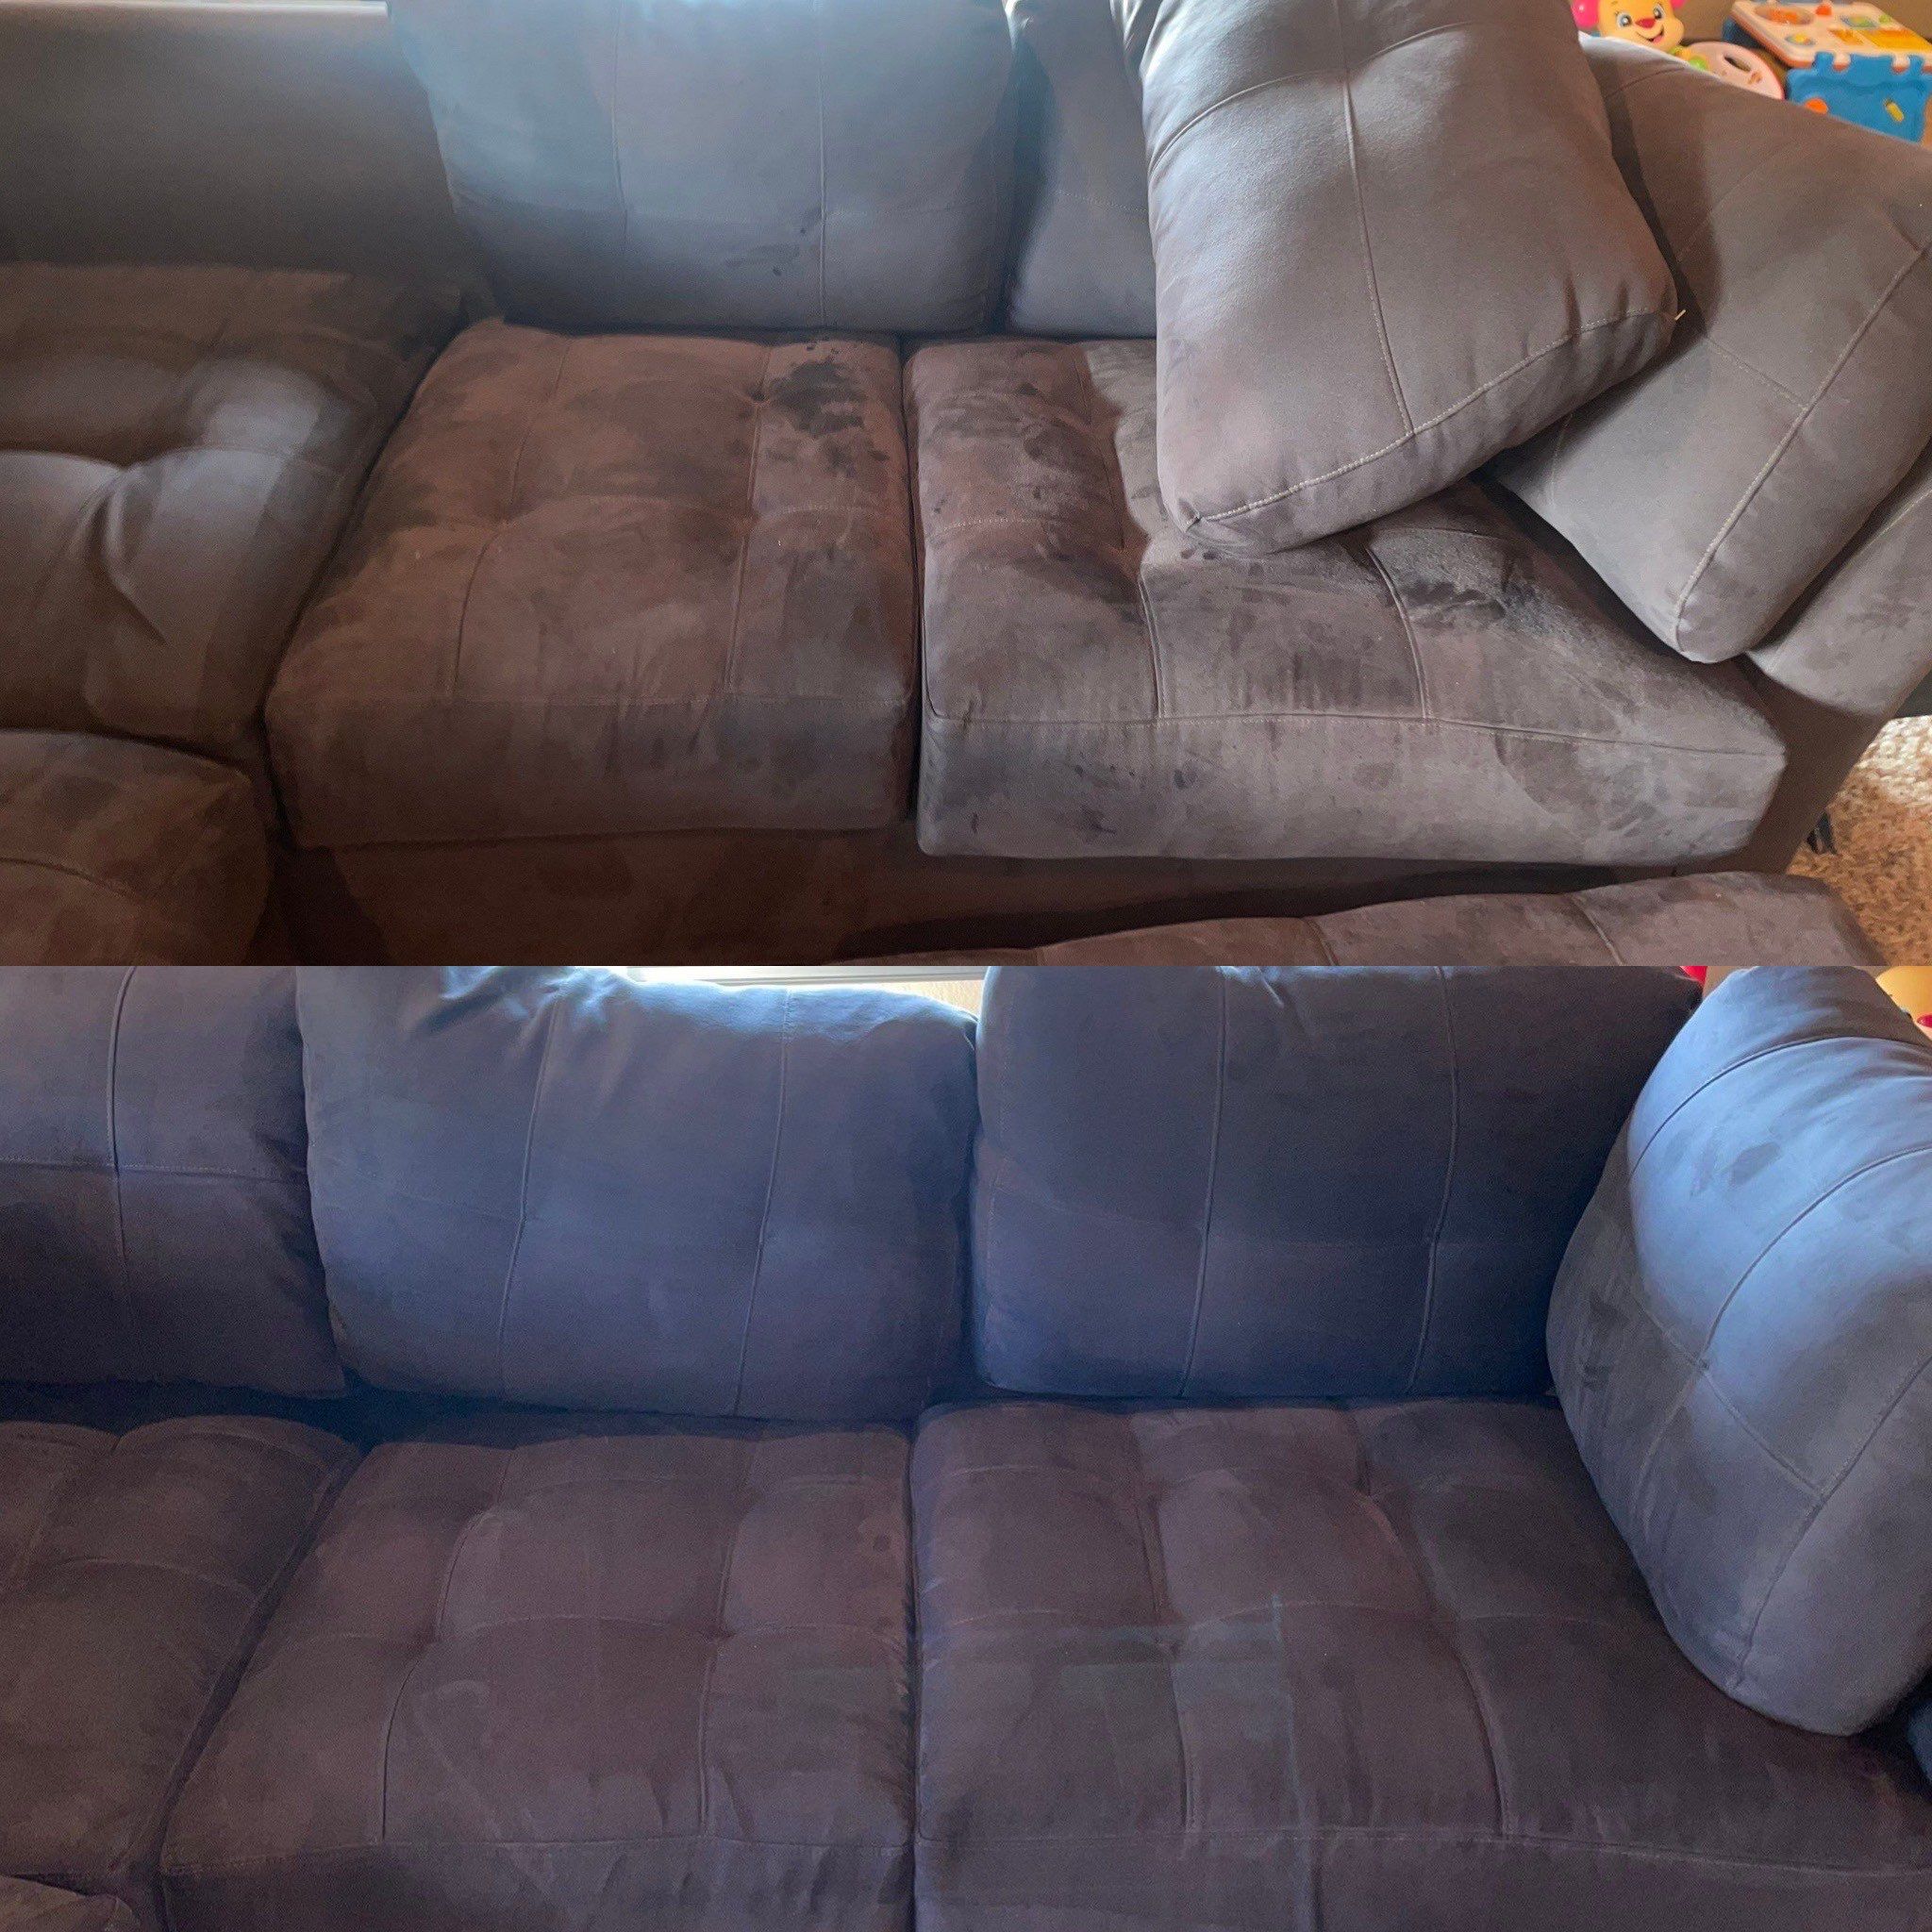 upholstery cleaning on a couch before and after dirt removal and fabric restoration